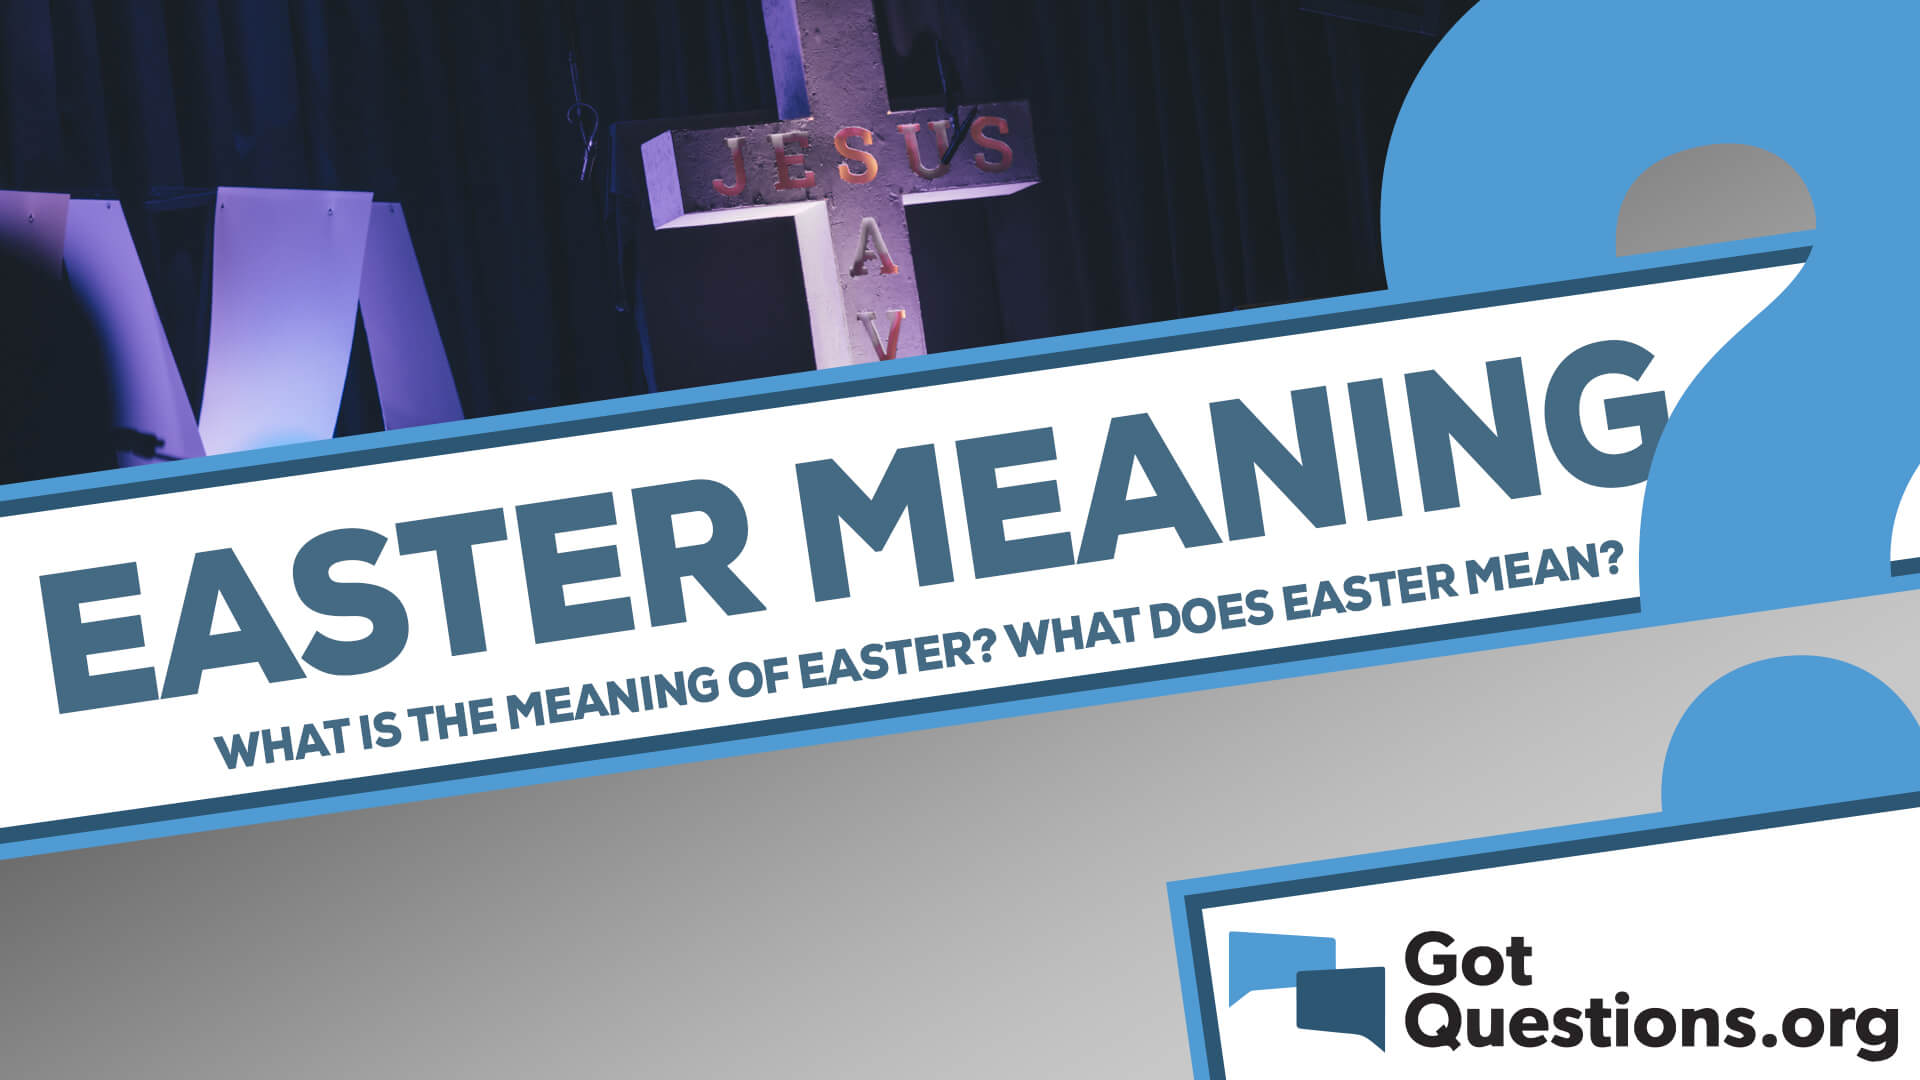 What is the meaning of Easter? What does Easter mean?